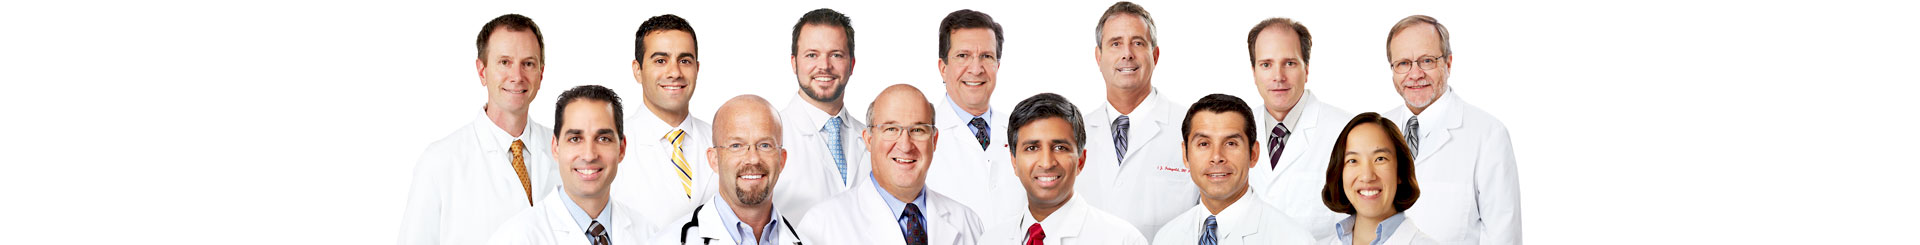 Baylor Scott & White Cardiovascular Consultants doctors group photo